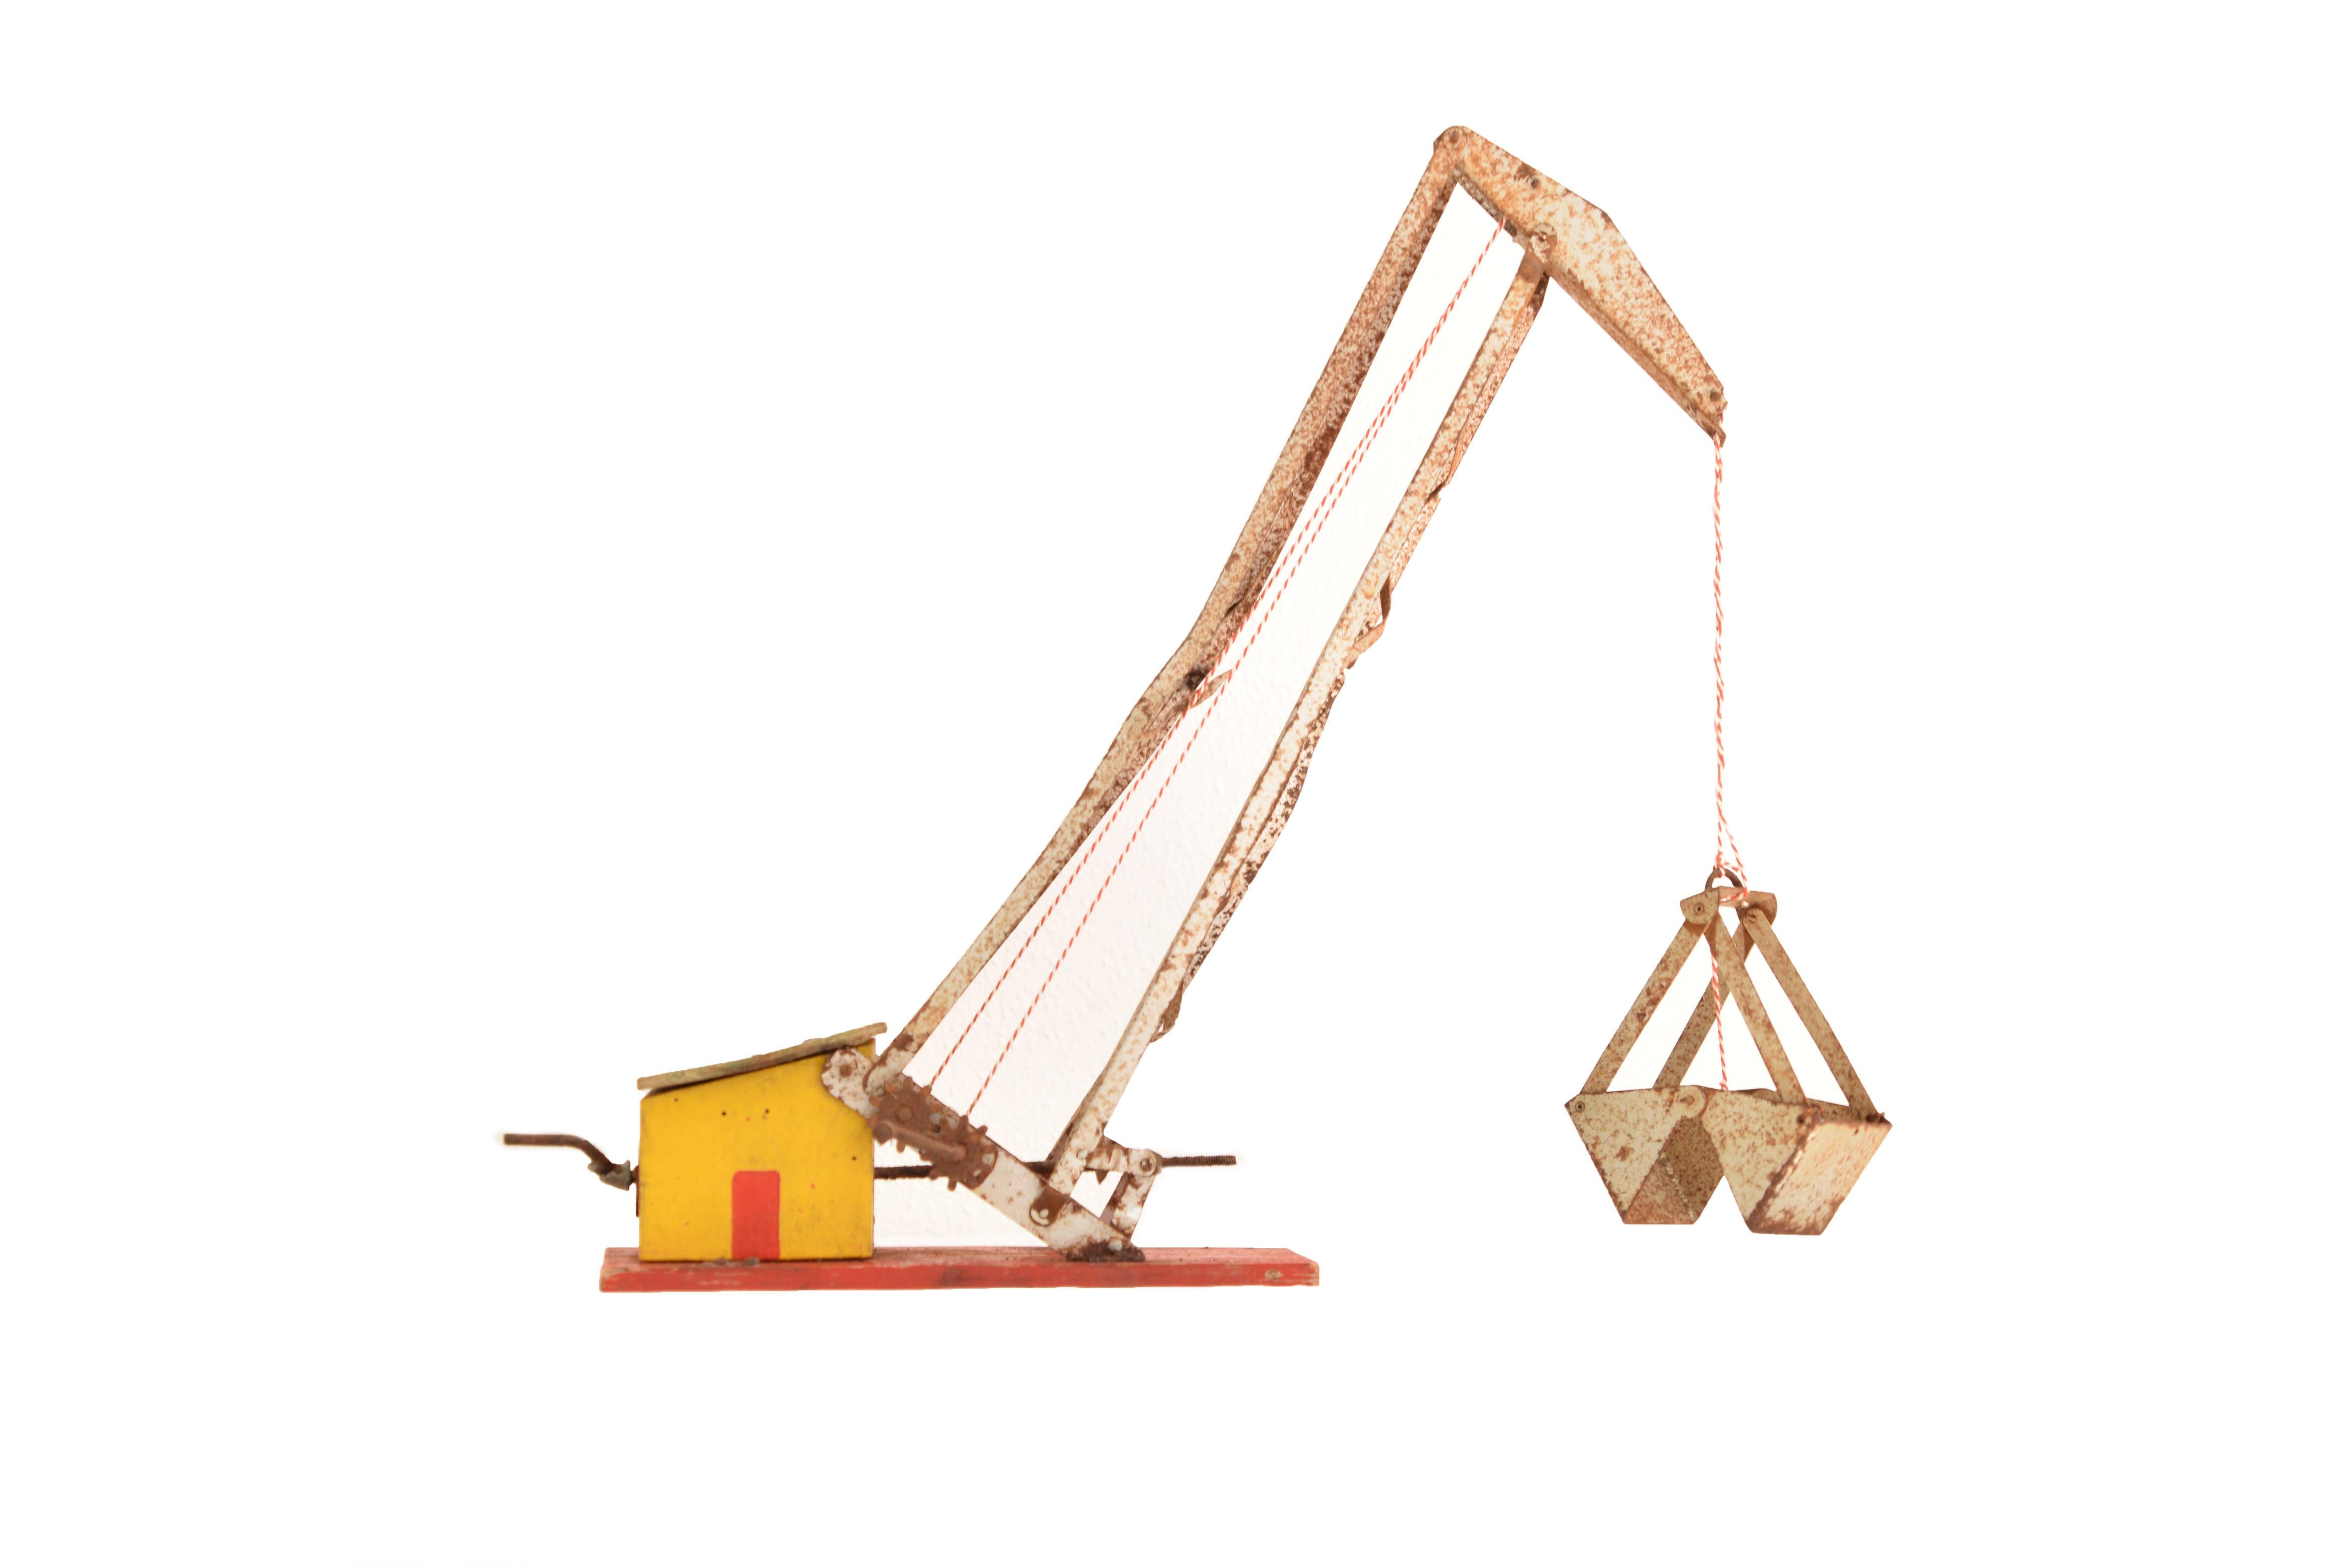 Art Deco Attic Find, Great Old Metal Crane, Toy for Boys For Sale